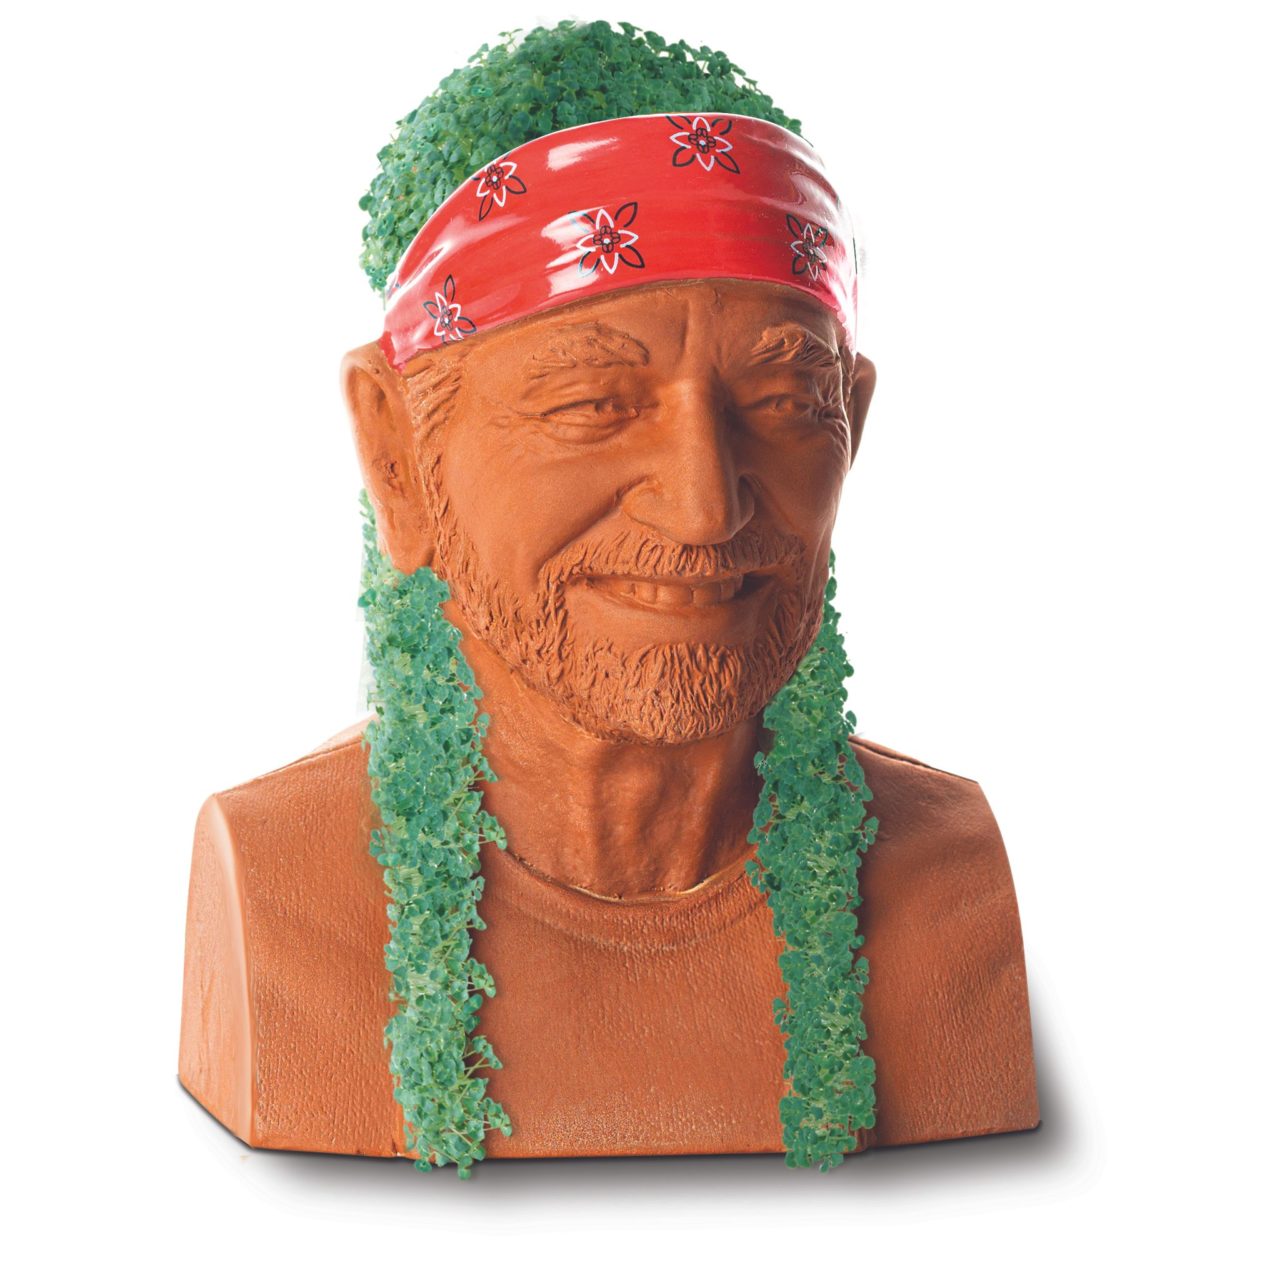 Willie Nelson Product Image (Chia Pet)